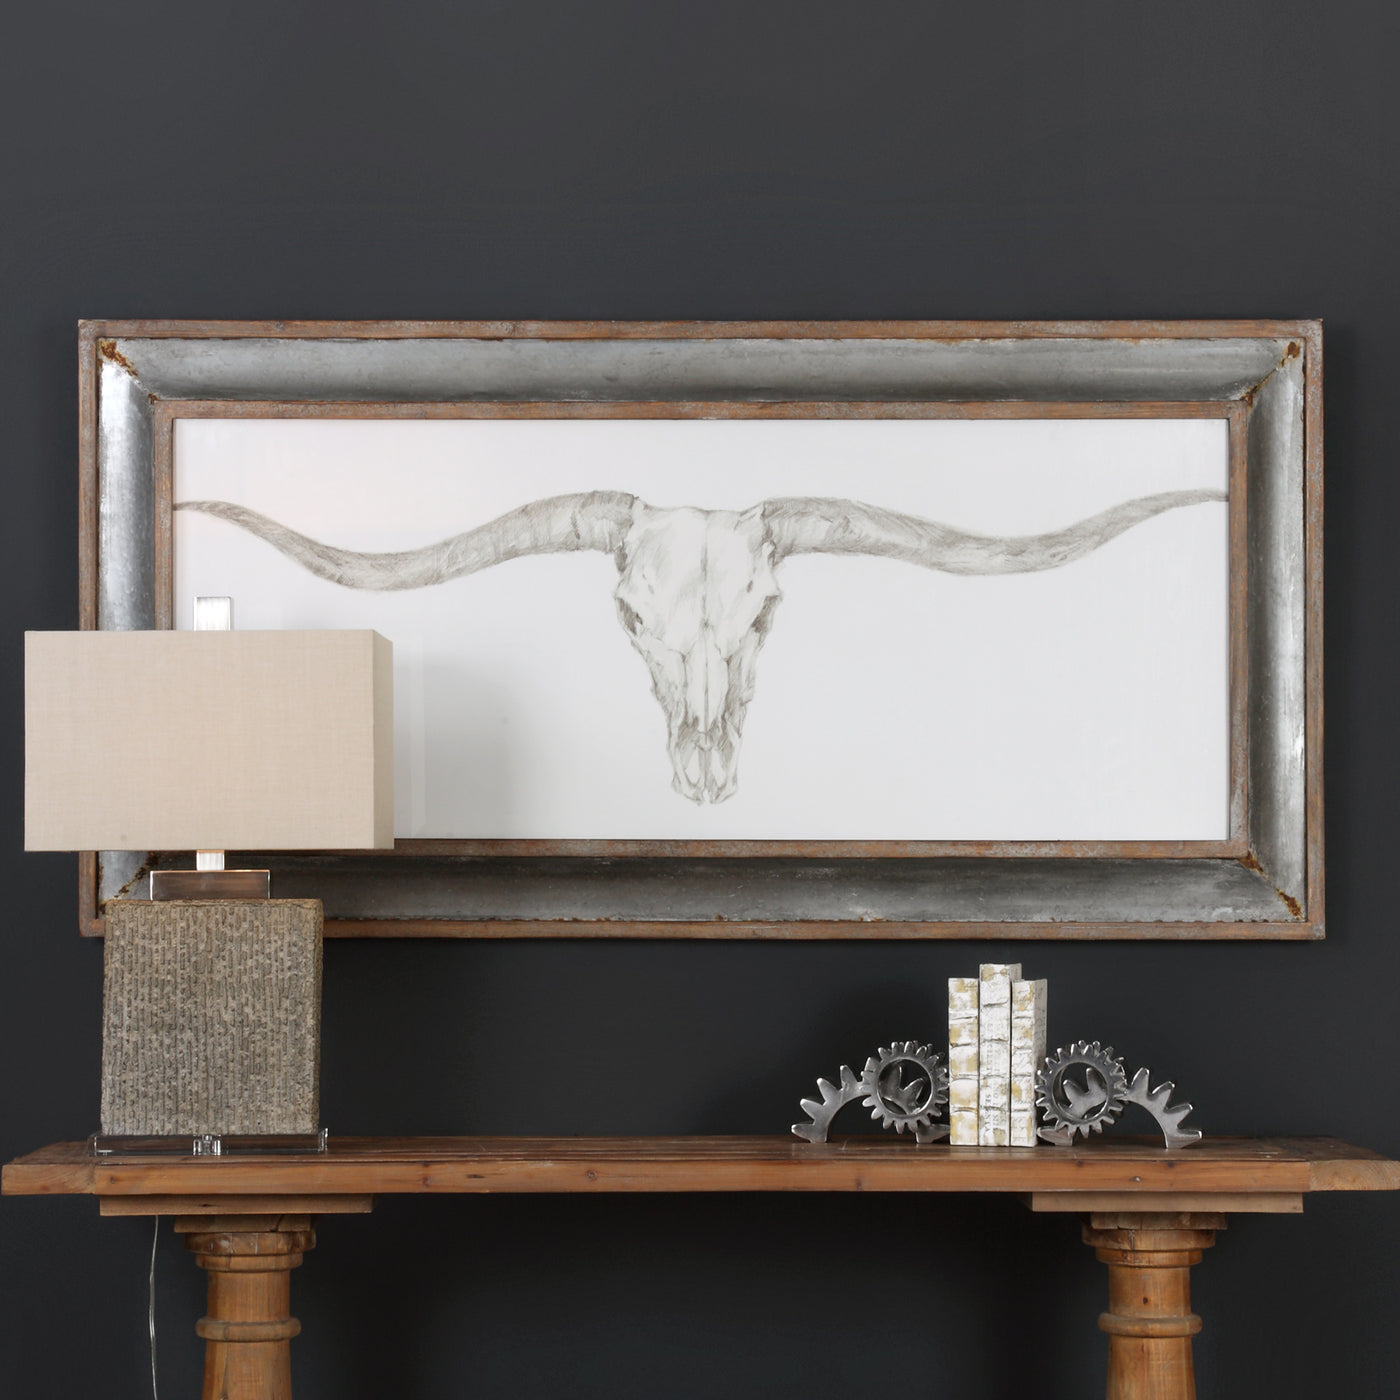 Rustic, Western Style Radiates From This Framed, Monochromatic Artwork. This Simple, Masculine Design Is Surrounded By A G...